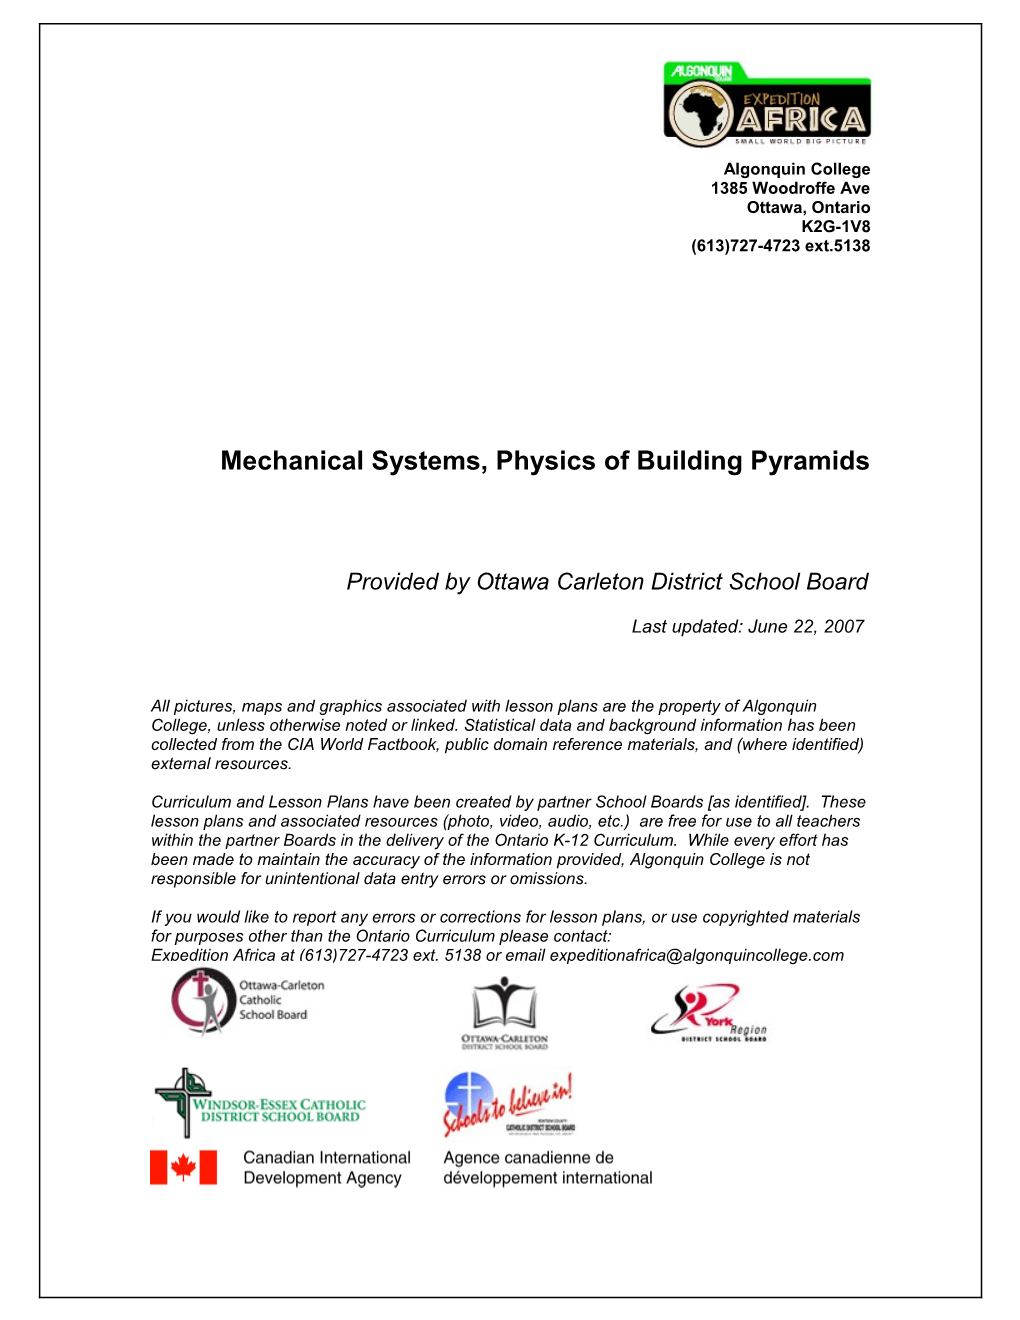 Mechanical Systems, Physics of Building Pyramids